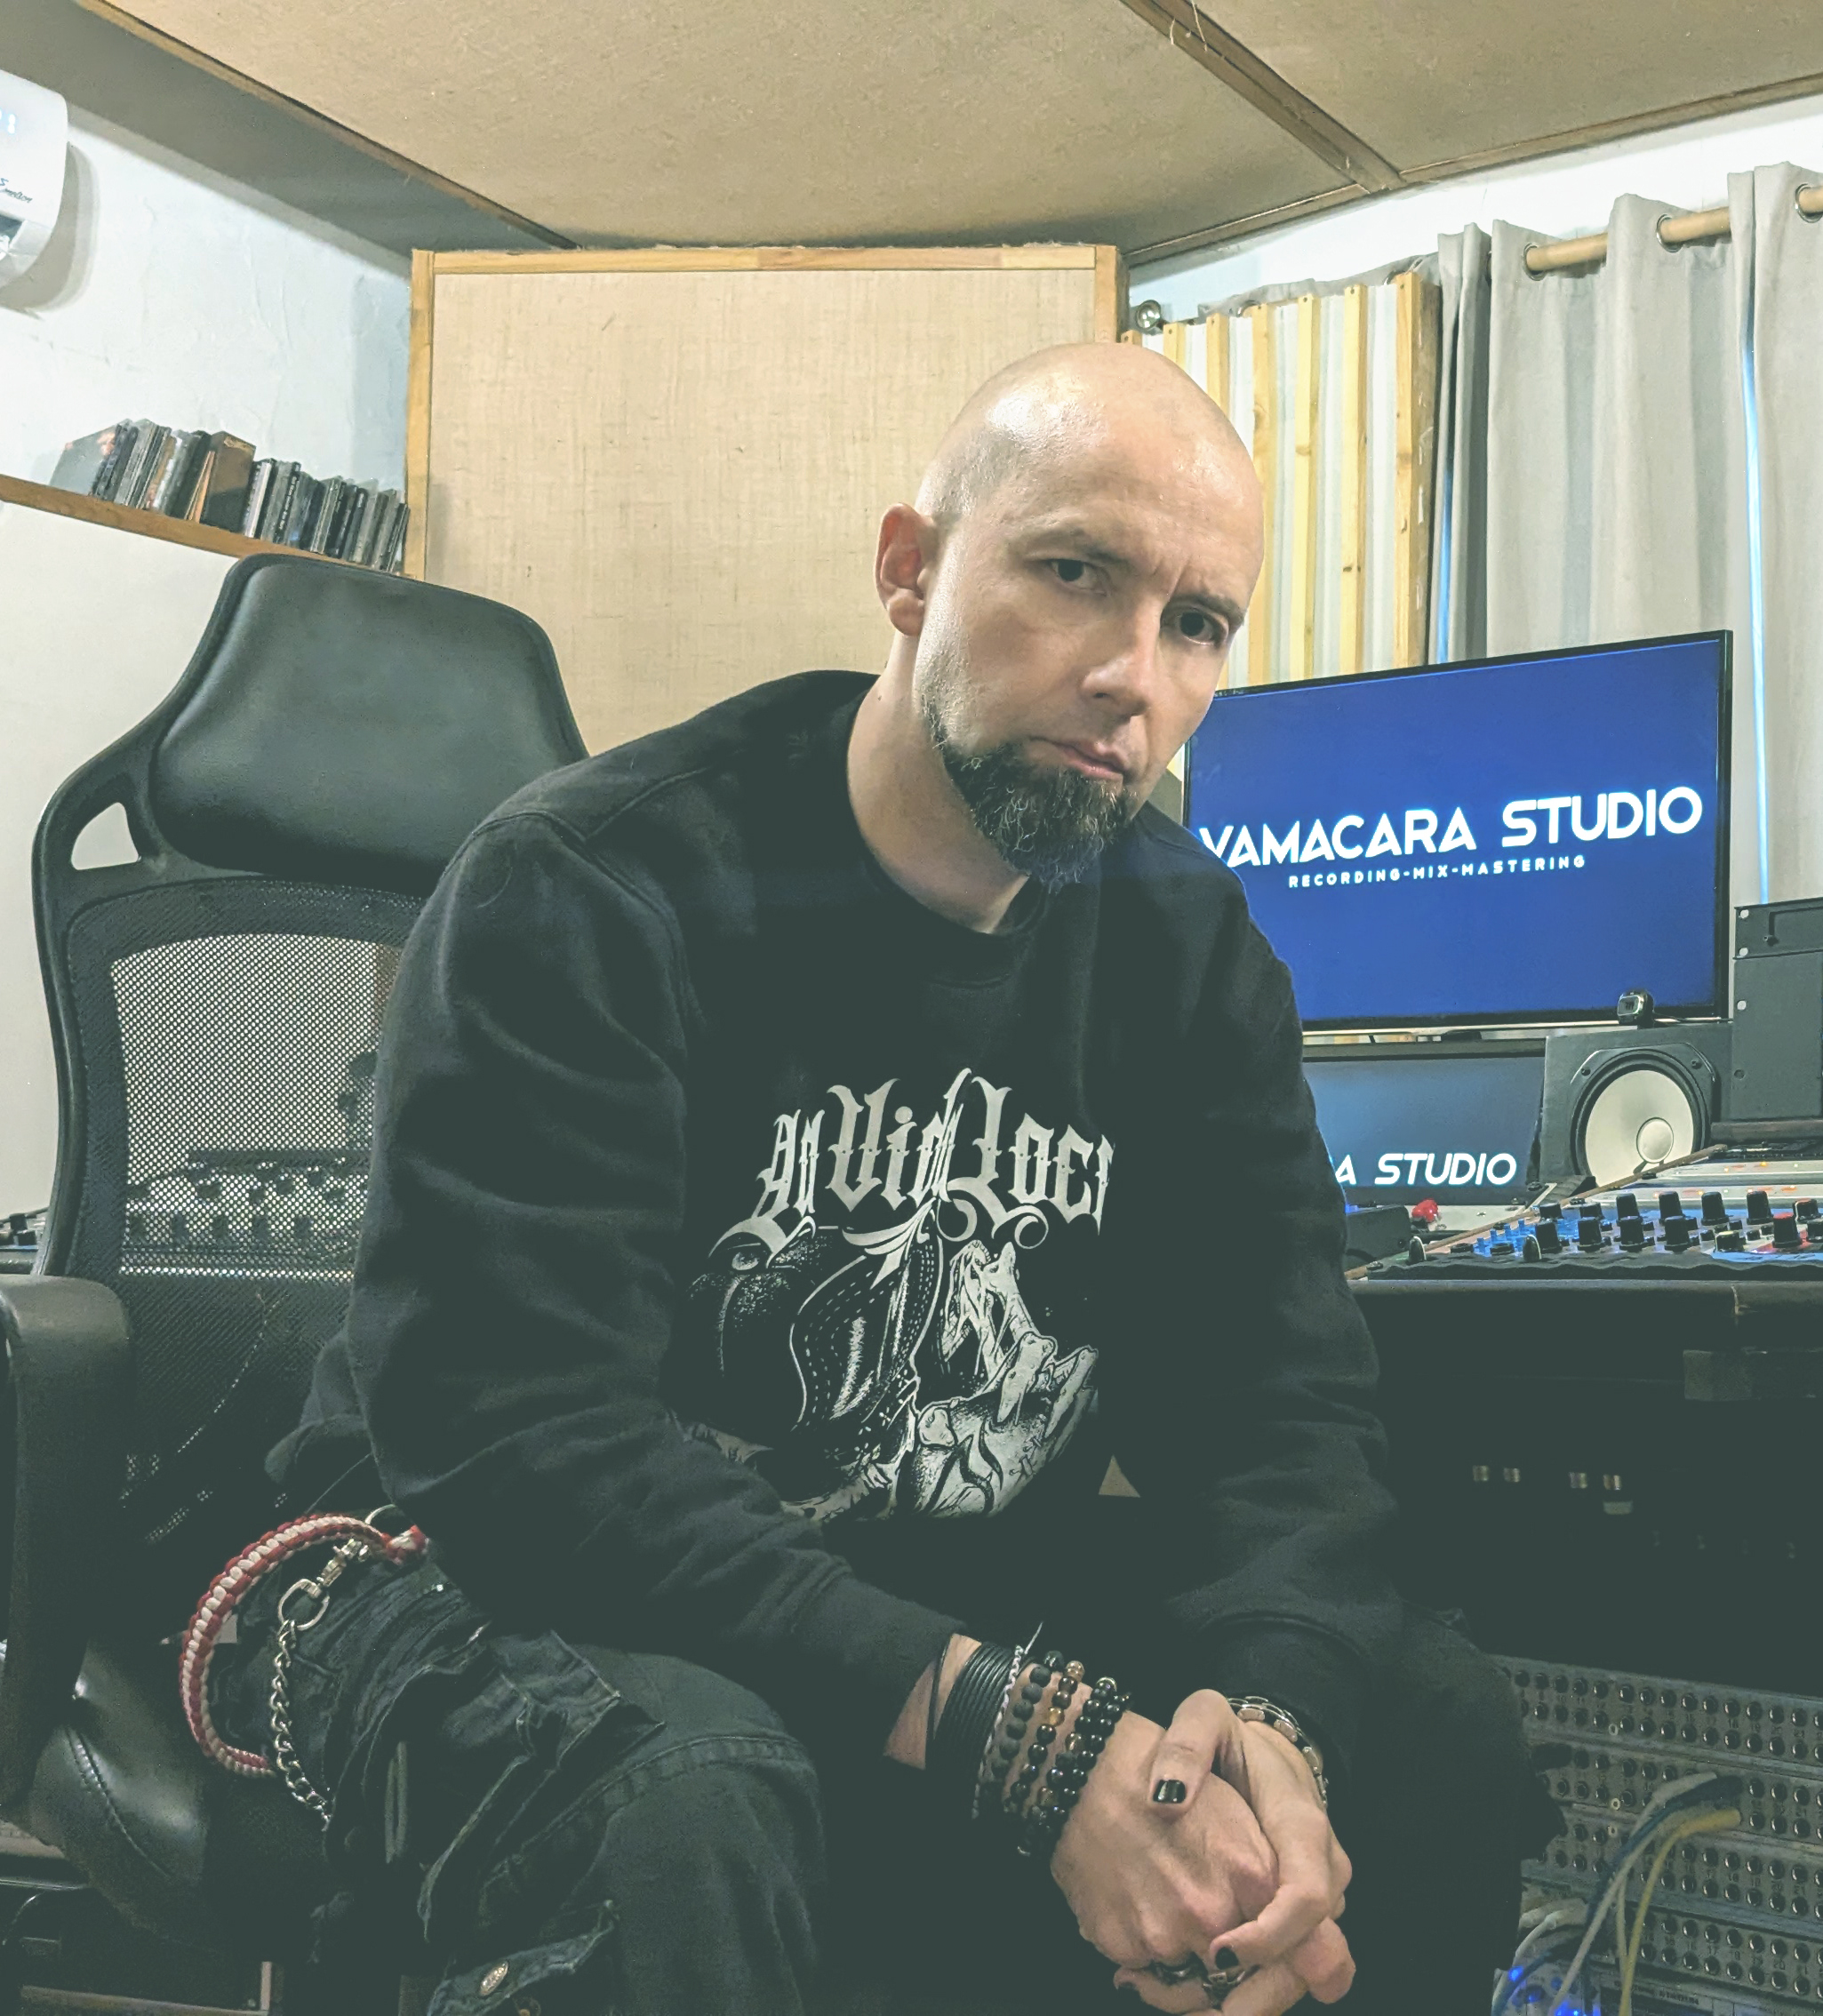 Niko "HK" producer, mix and mastering engineer